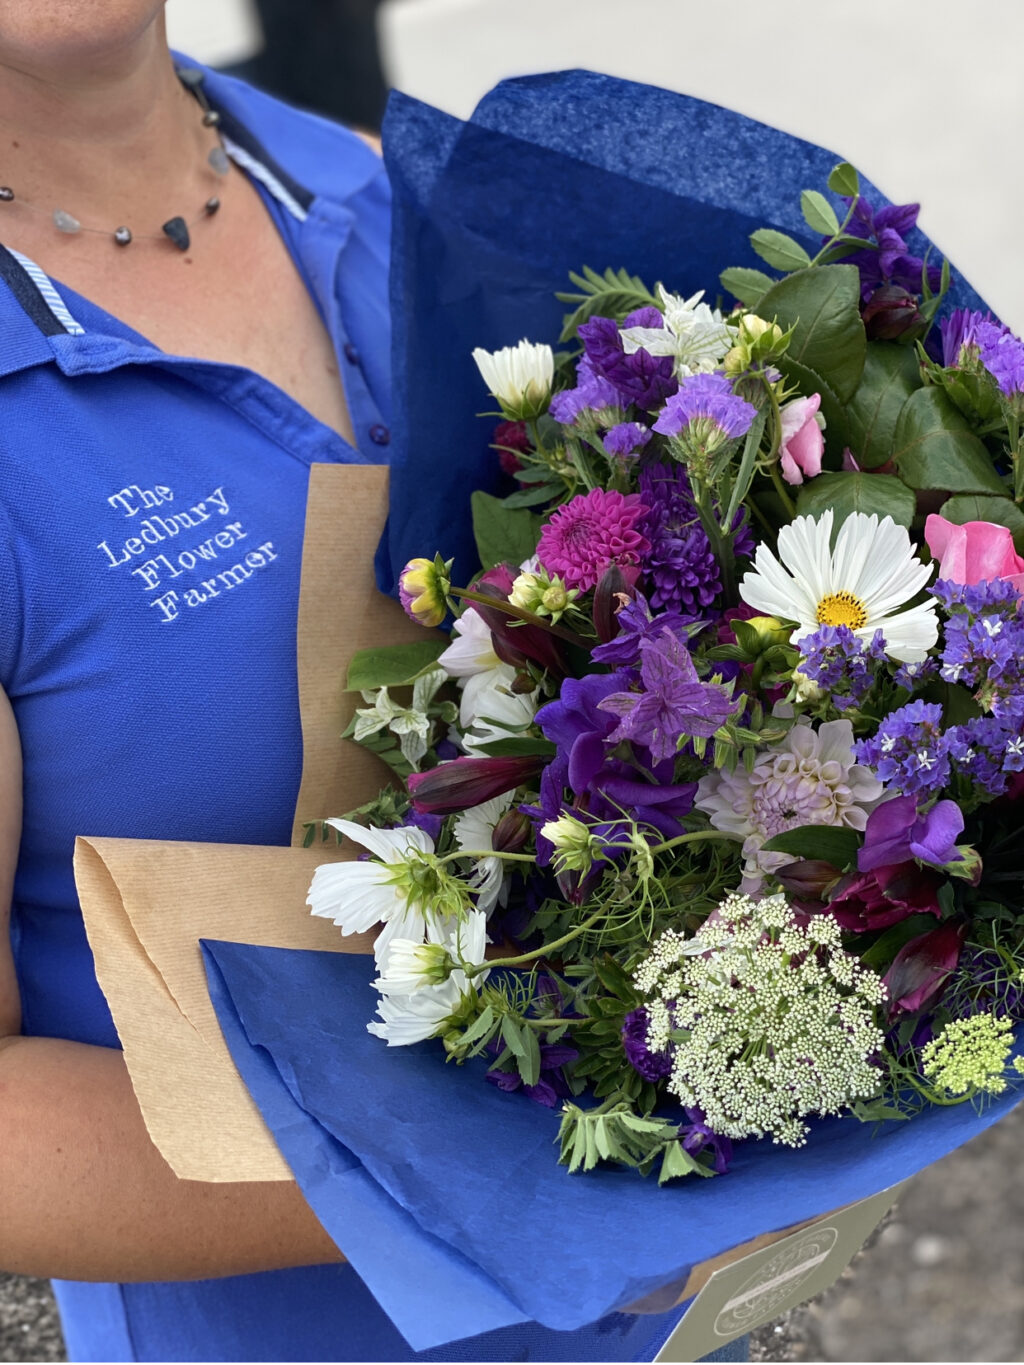 Rozanne, The Ledbury Flower Farmer, holds a bouquet of bright late summer flowers in blues, pinks and whites wrapped in vibrant blue tissue.